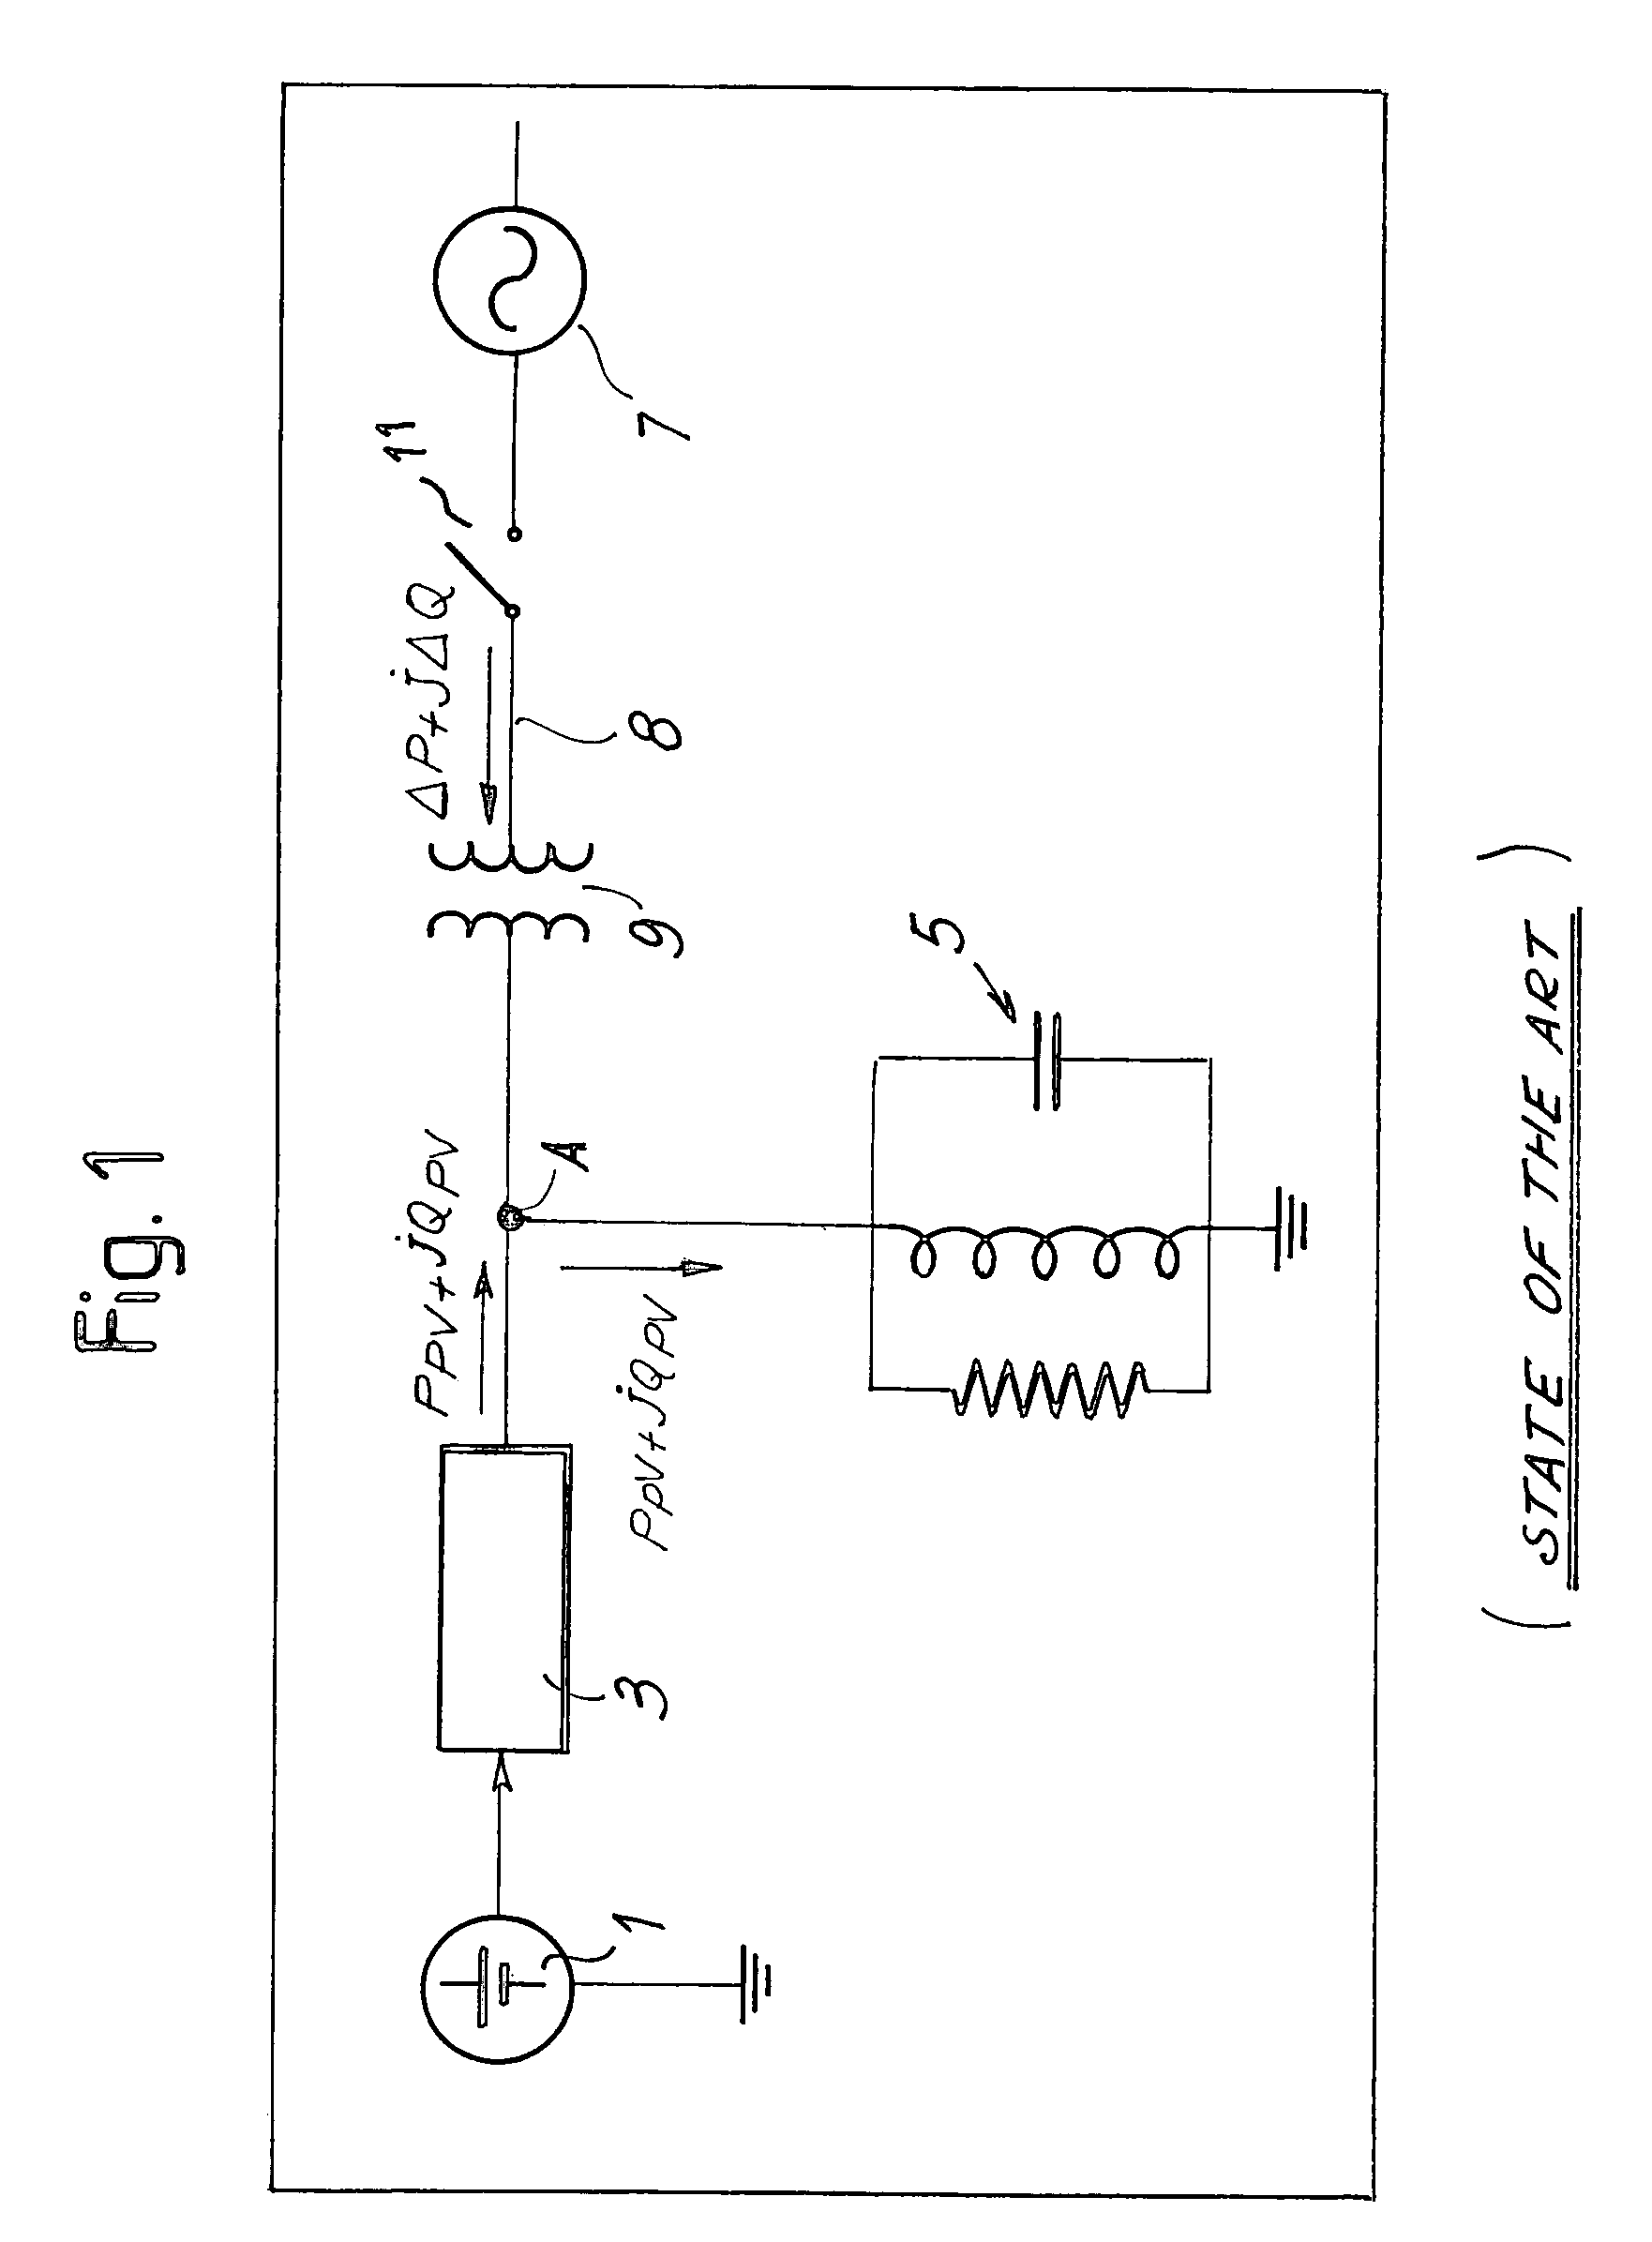 Anti-islanding method and system for distributed power generation systems